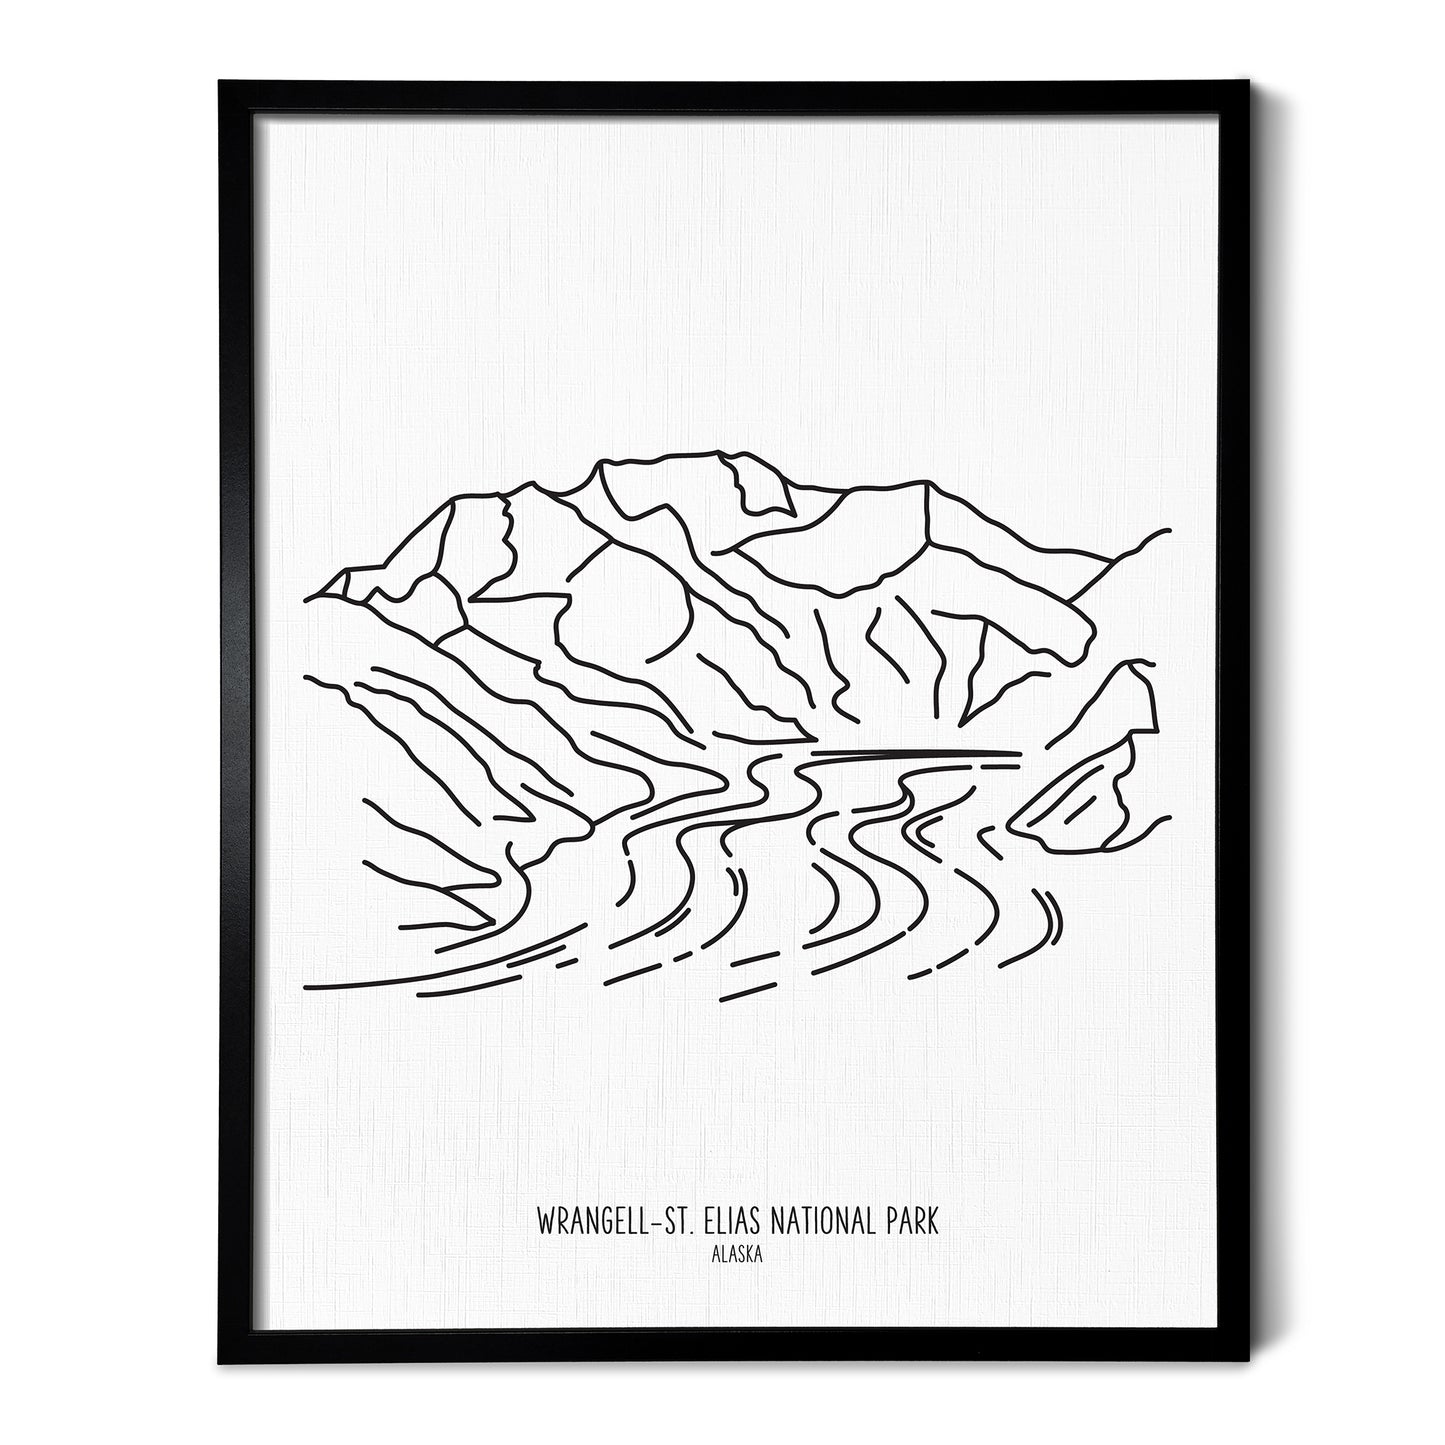 A line art drawing of Wrangell Saint Elias National Park on white linen paper in a thin black picture frame